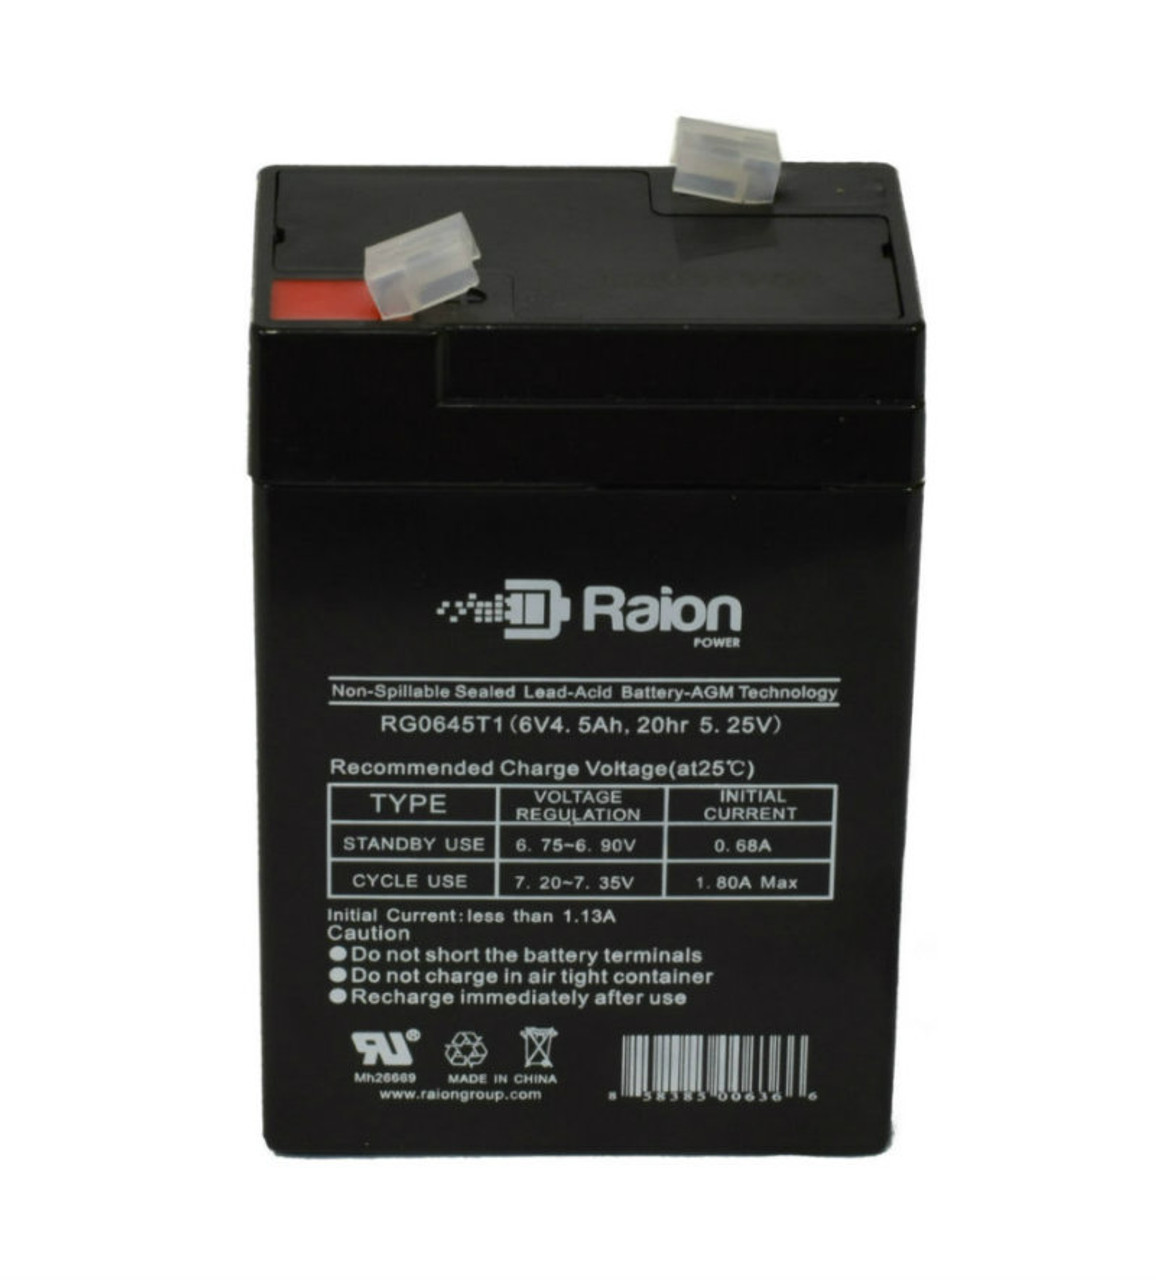 Raion Power RG0645T1 Replacement Battery Cartridge for Double Tech DB6-5